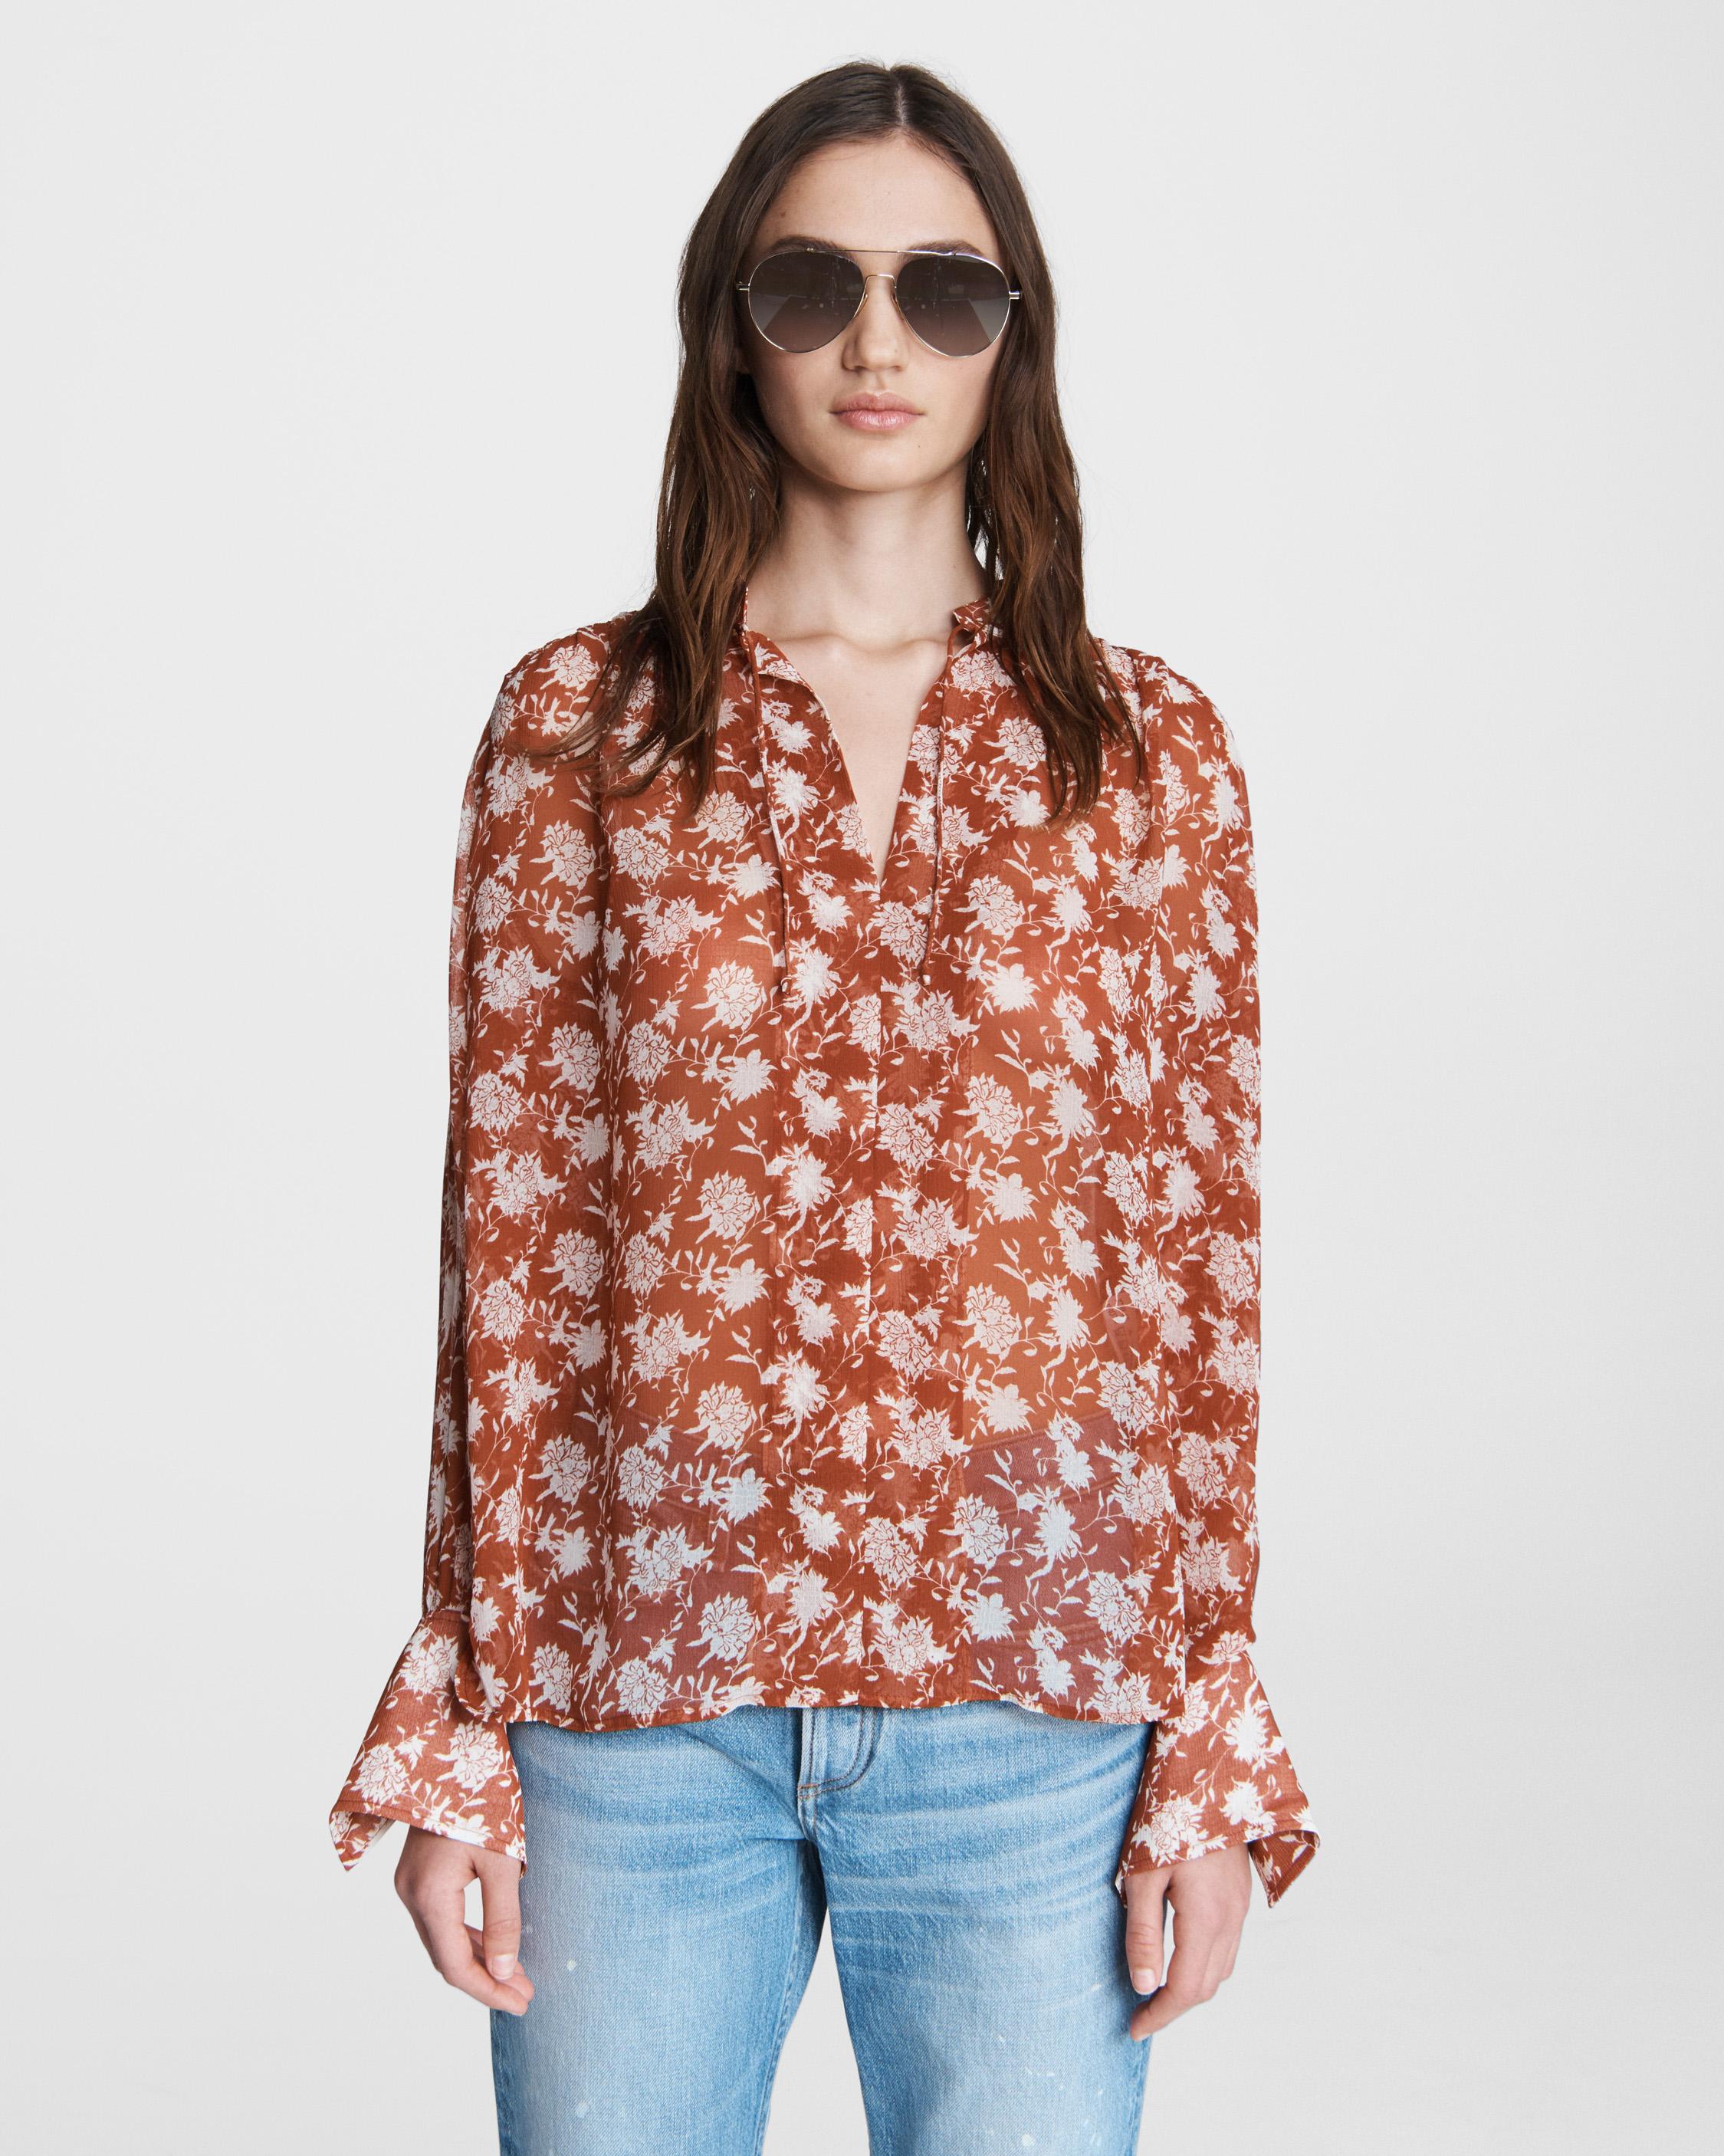 Buy the Carly Floral Tie Blouse | rag & bone